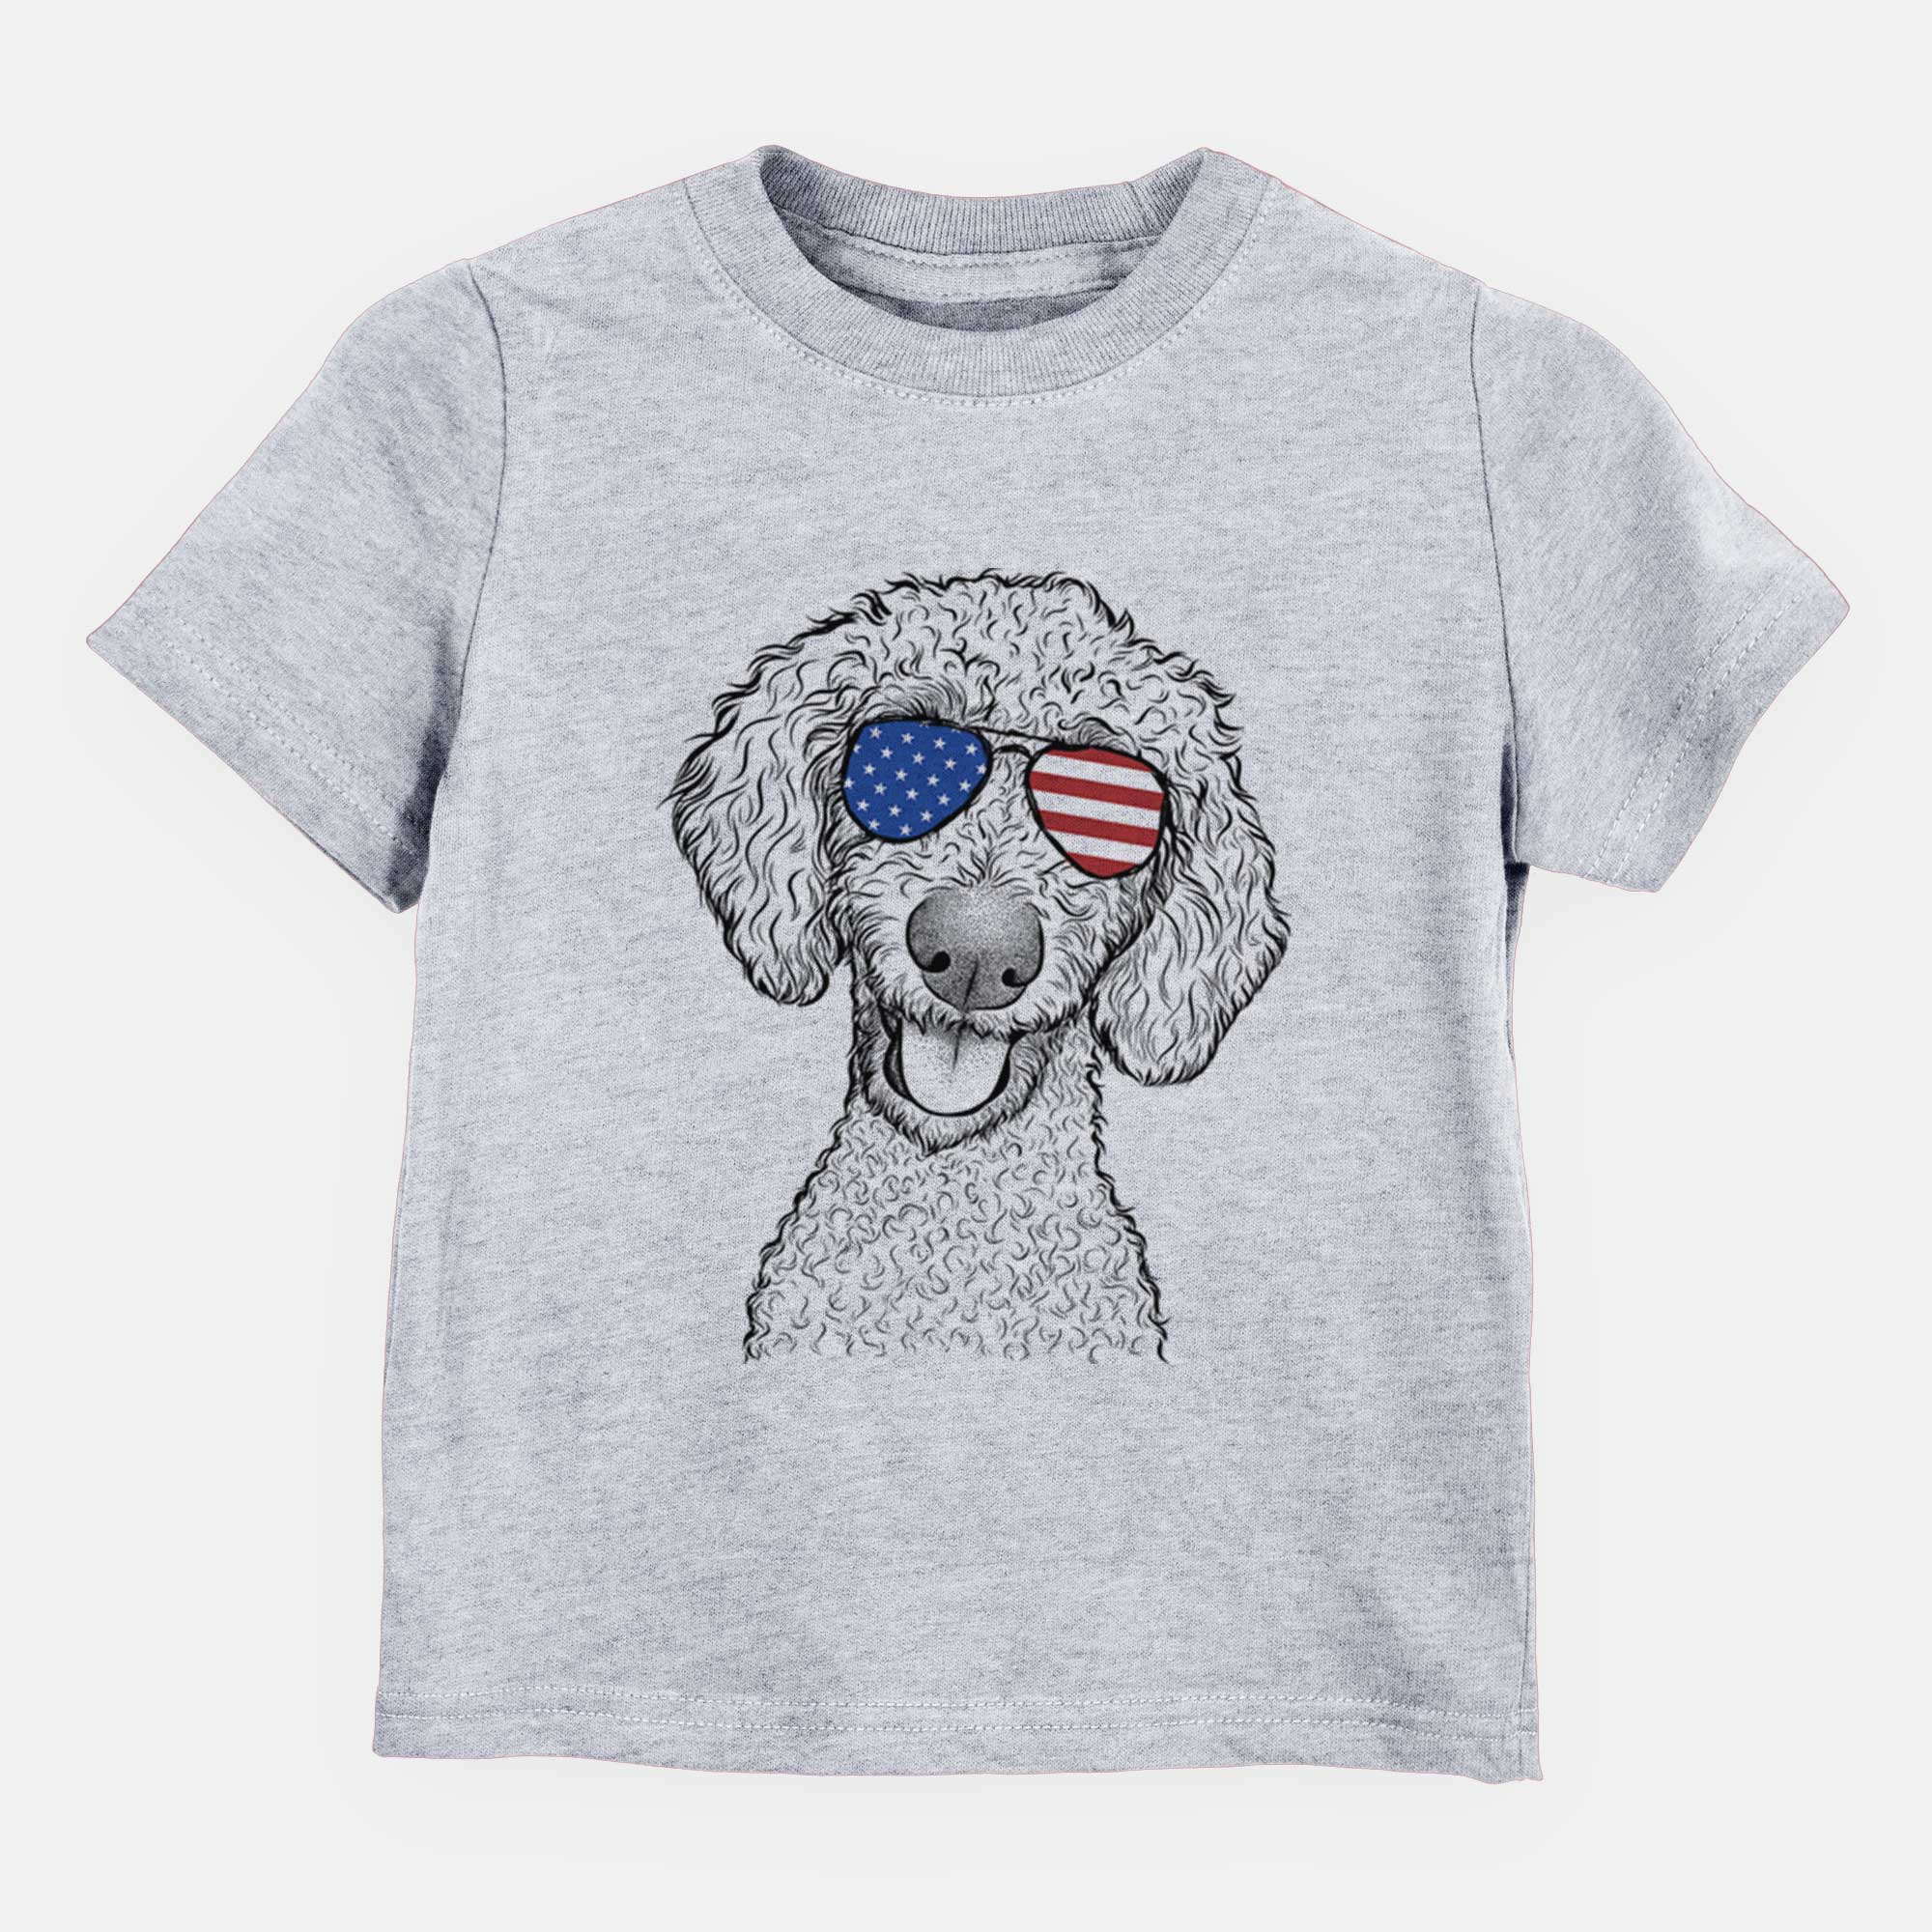 USA Fenway the Goldendoodle - Kids/Youth/Toddler Shirt